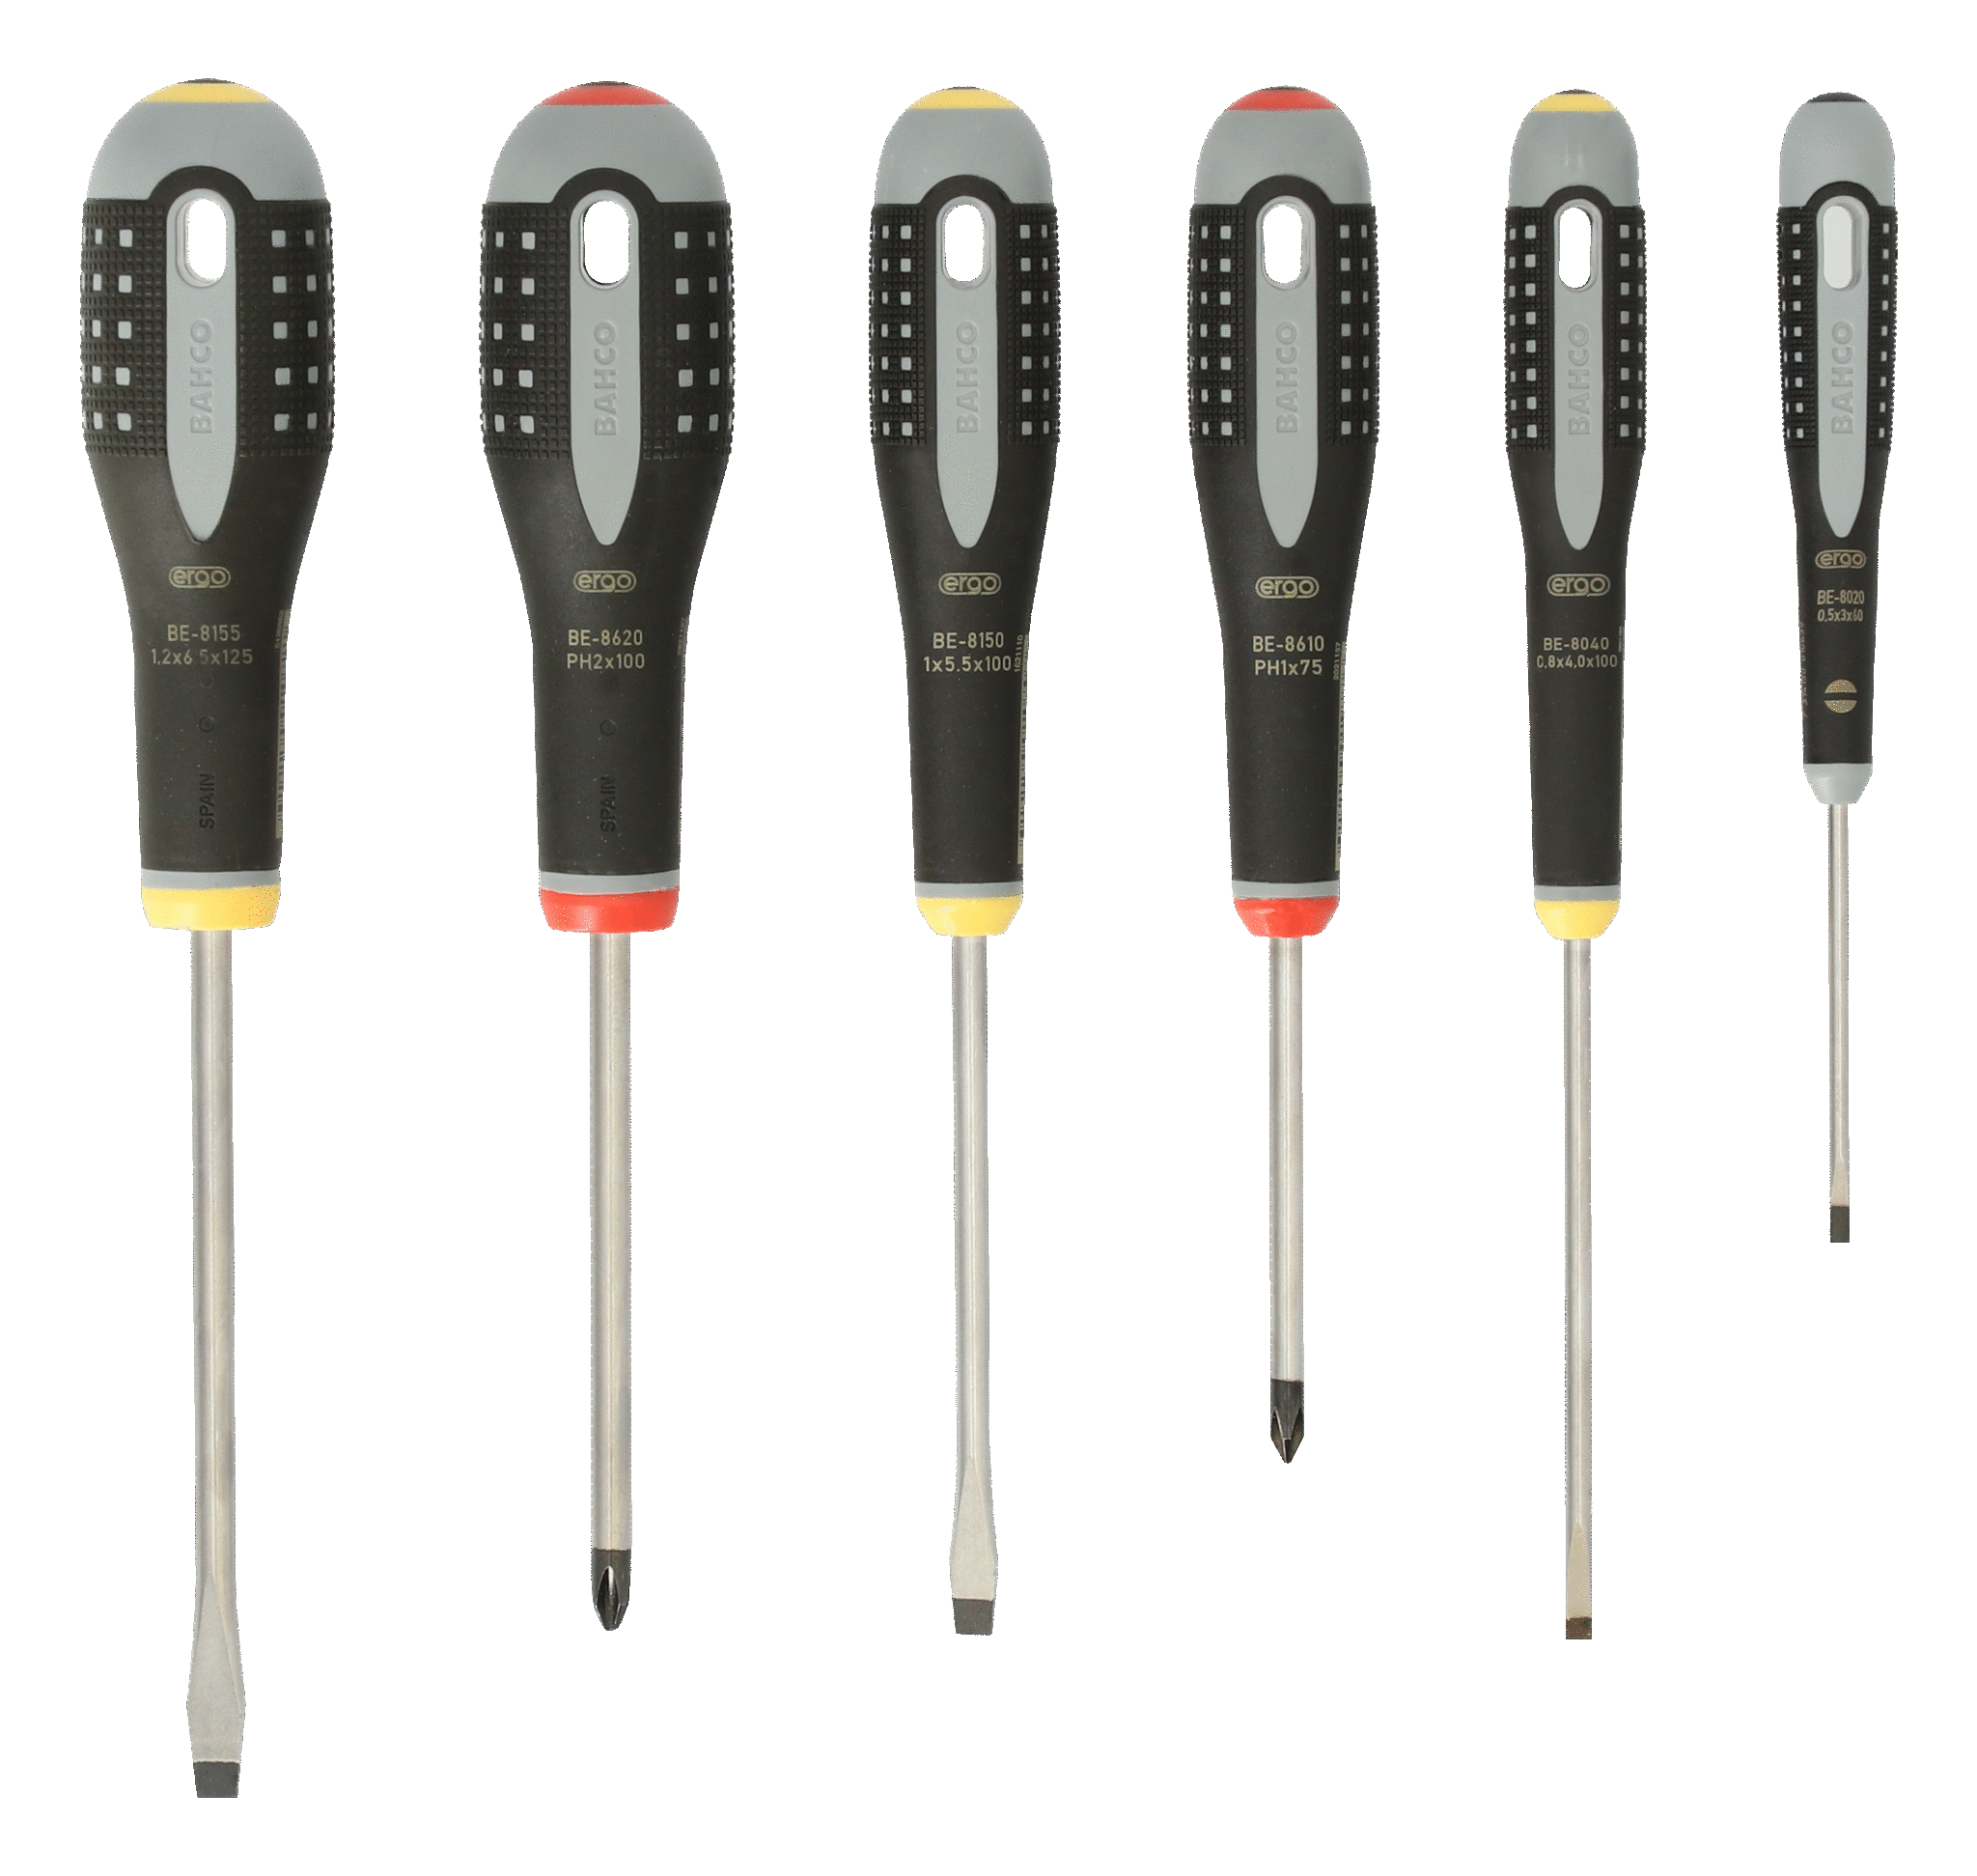 ERGO™ Slotted/Phillips Screwdriver Set with Rubber Grip 6 Pcs - BE-9881 by Bahco